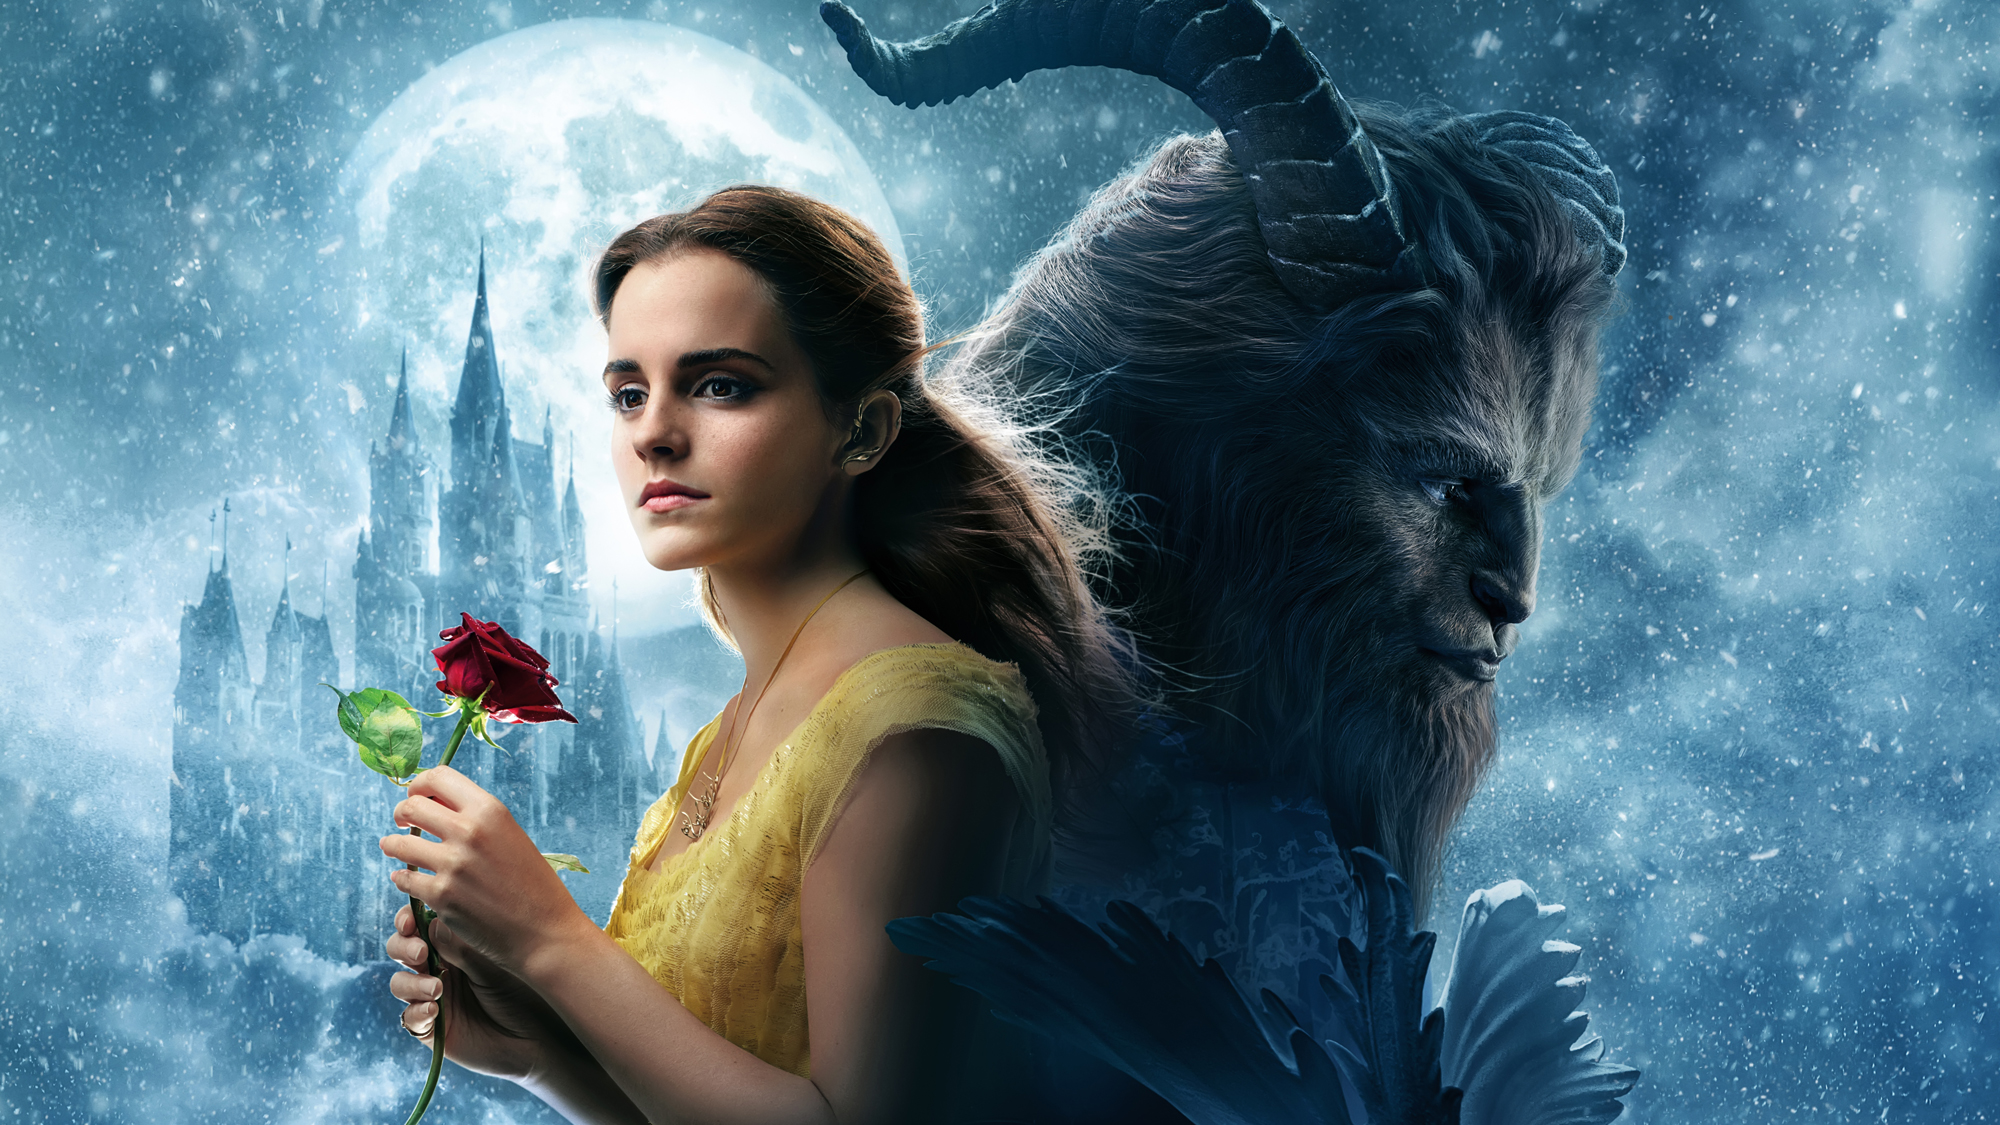 beauty and the beast movie online